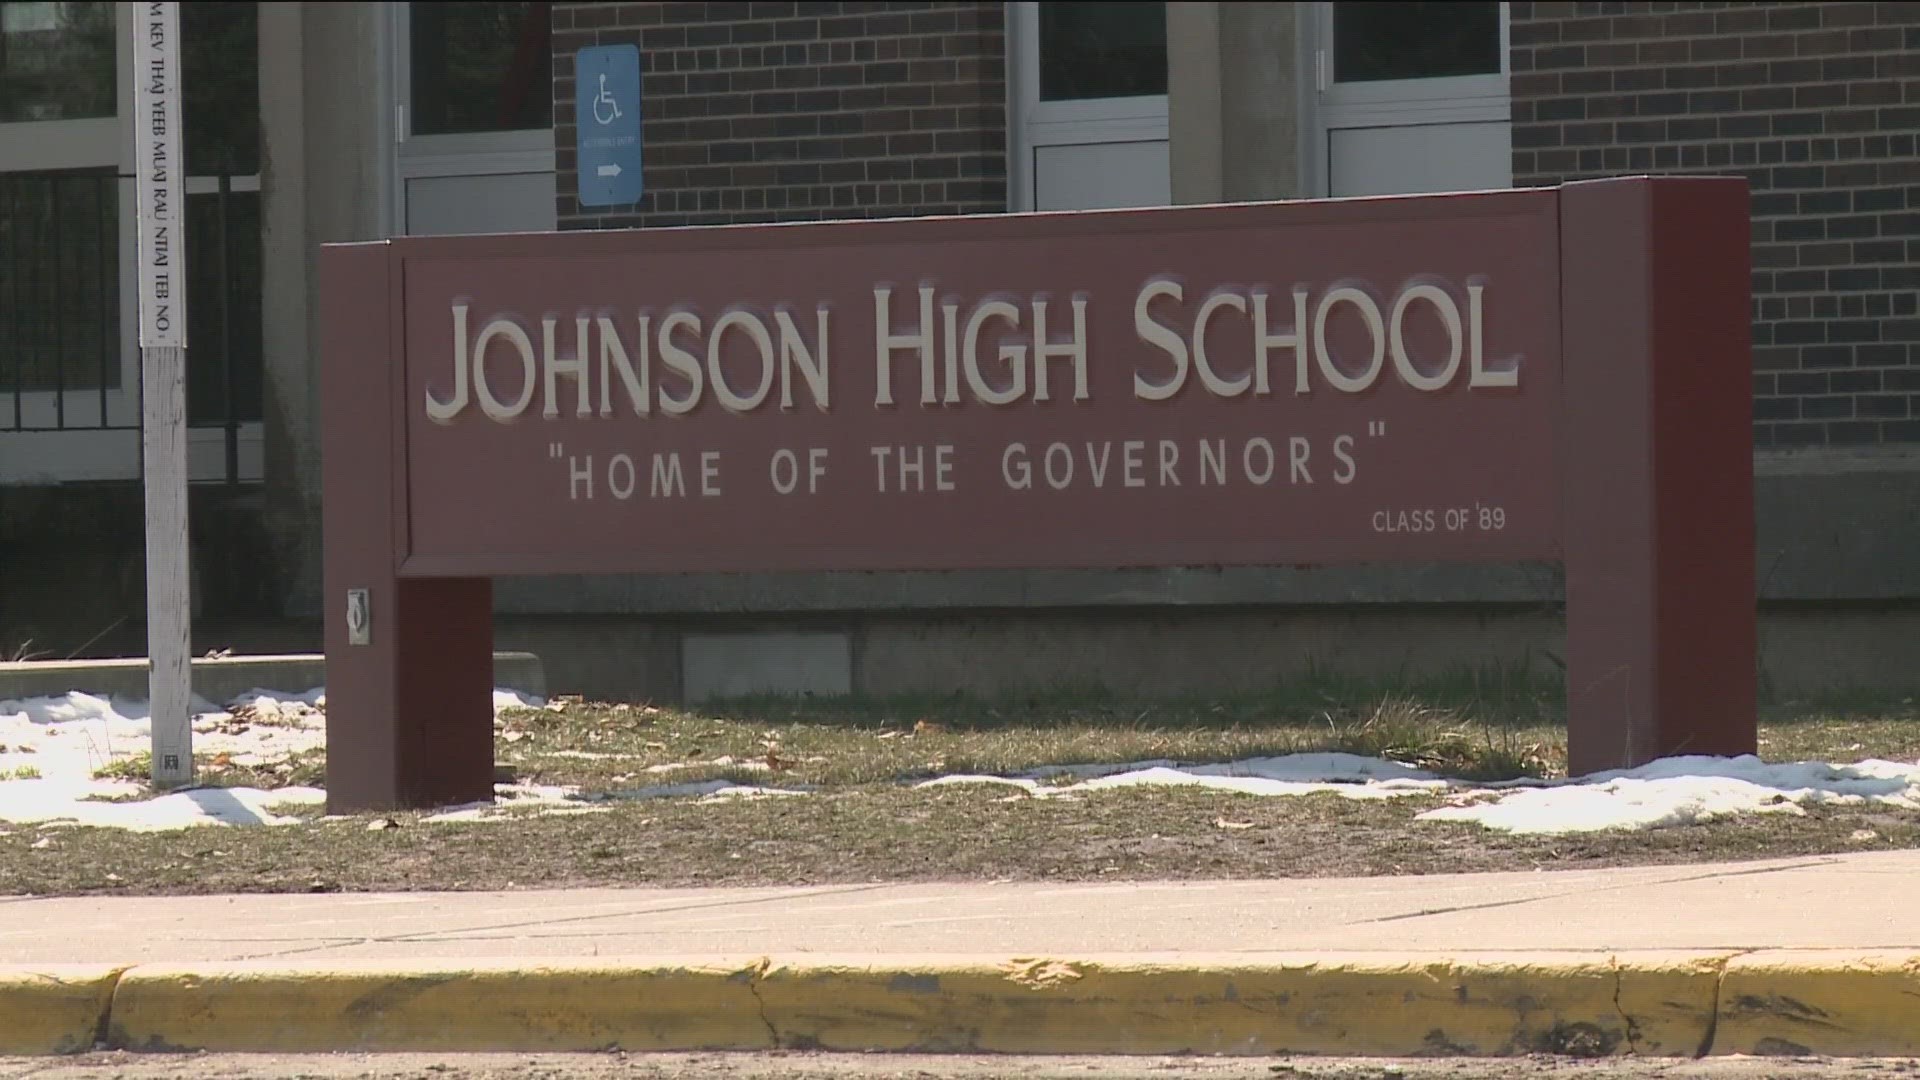 After COVID caused some students to suffer academically, leaders at St. Paul’s Johnson High School made some necessary changes to help more kids earn their diplomas.